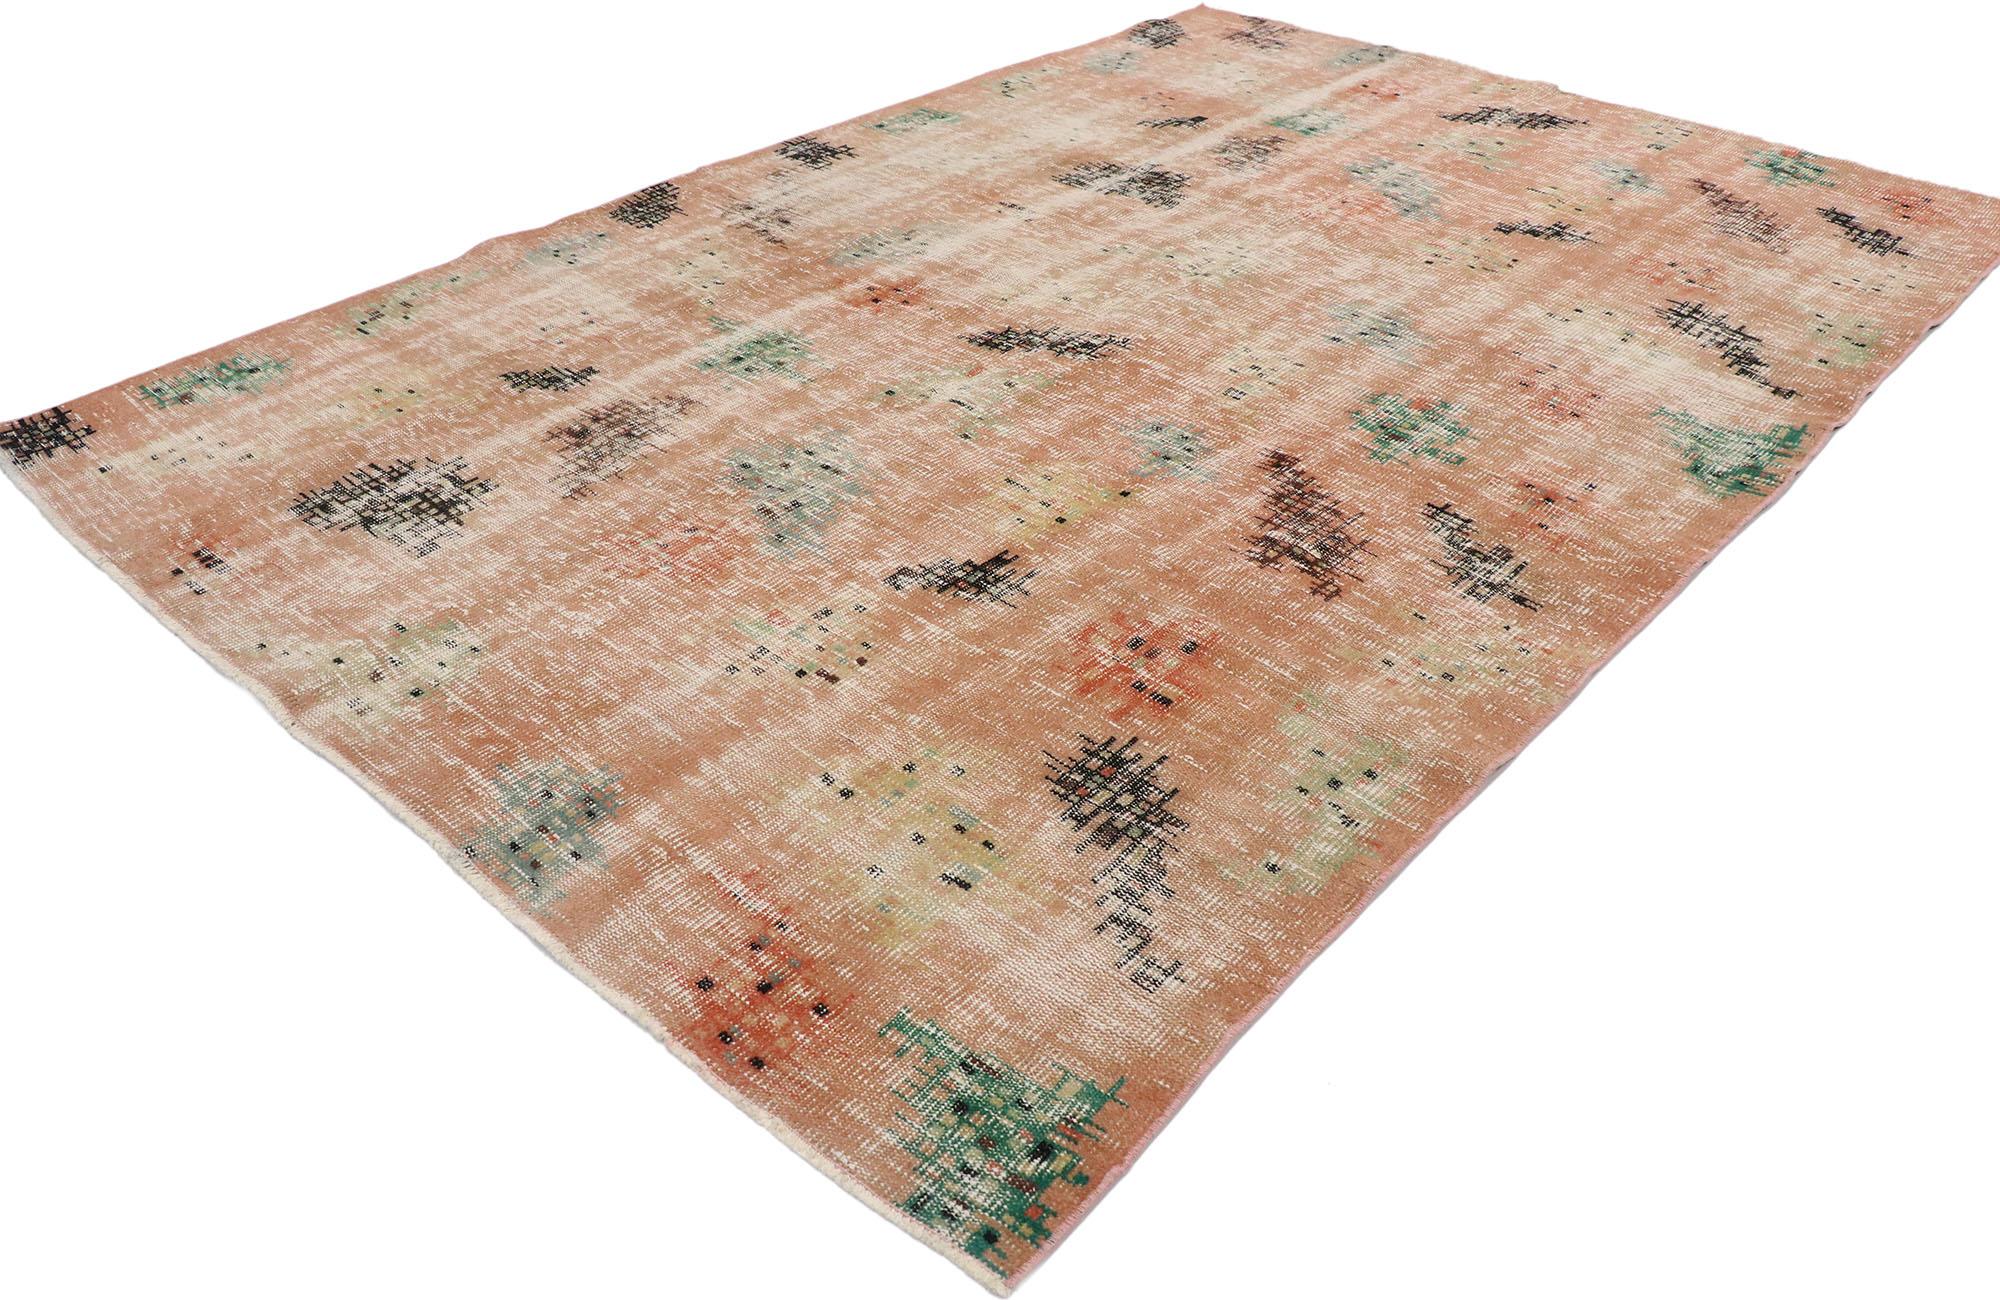 53307, Zeki Muren distressed vintage Turkish Sivas rug with Expressionist style. With its geometric pattern, bold form and vibrant colors, this hand knotted wool Zeki Muren distressed vintage Turkish Sivas rug beautifully embodies Abstract